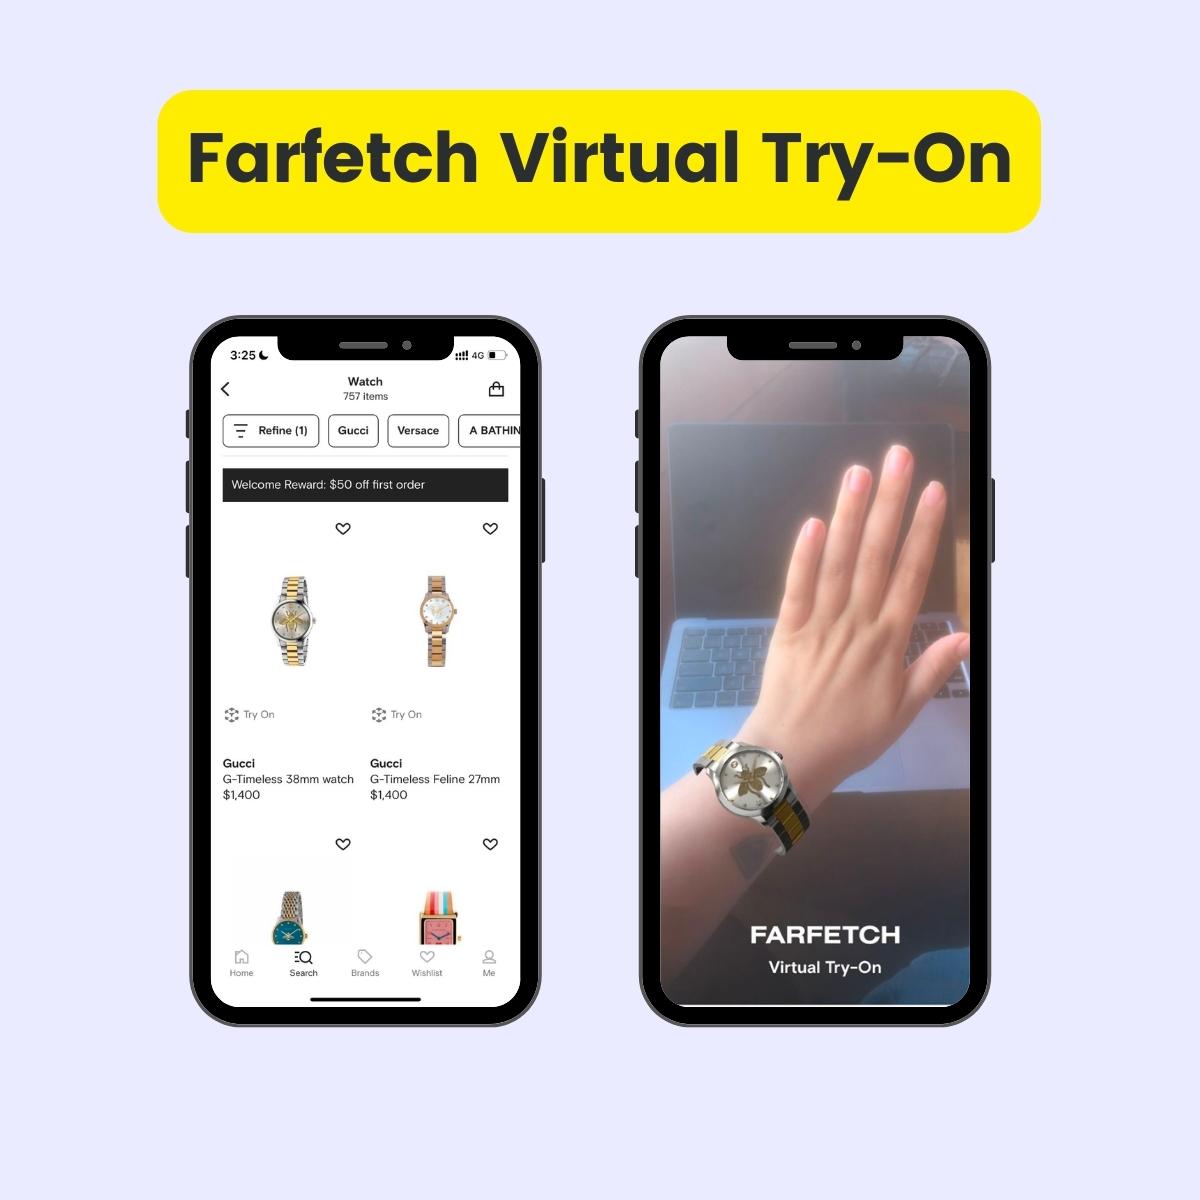 Farfetch virtual try on demo with two cell phones